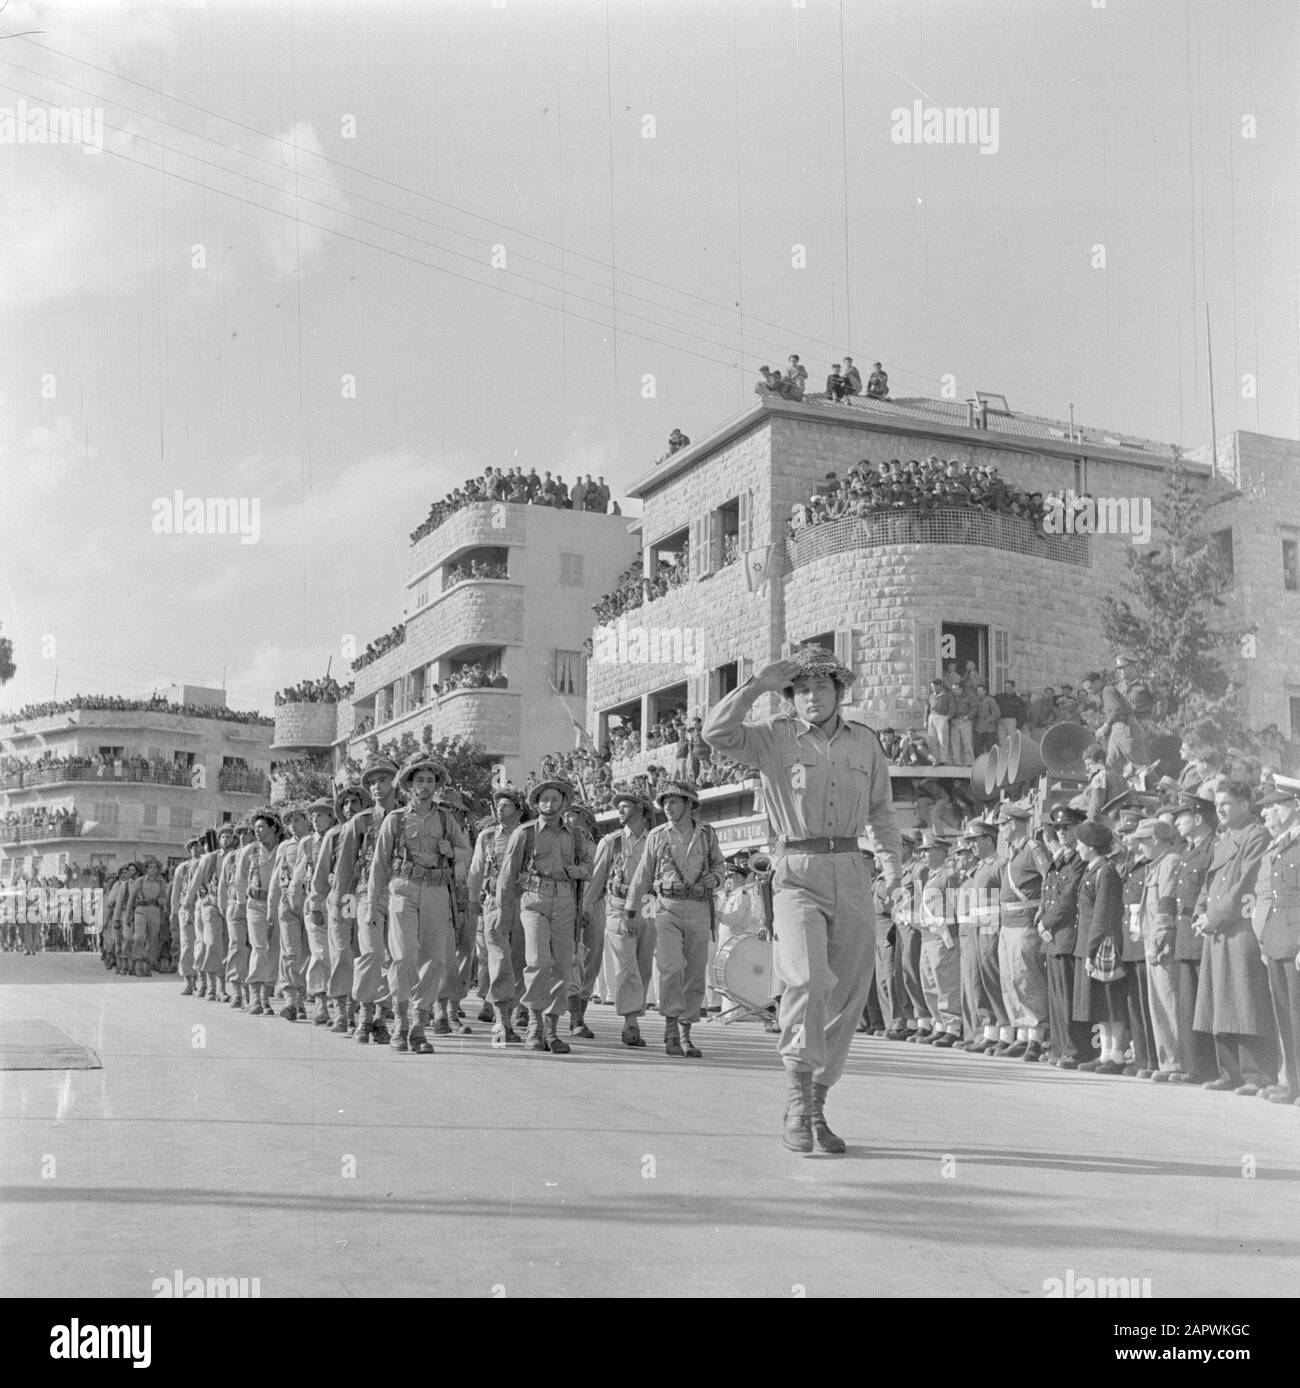 Israel 1948-1949: Haifa  Military unit during the military parade in Haifa on the occasion of the first anniversary of Israel's independence on May 15, 1949 Date: 1948 Location: Haifa, Israel Keywords: building blocks, military parades, national holidays, uniforms Stock Photo